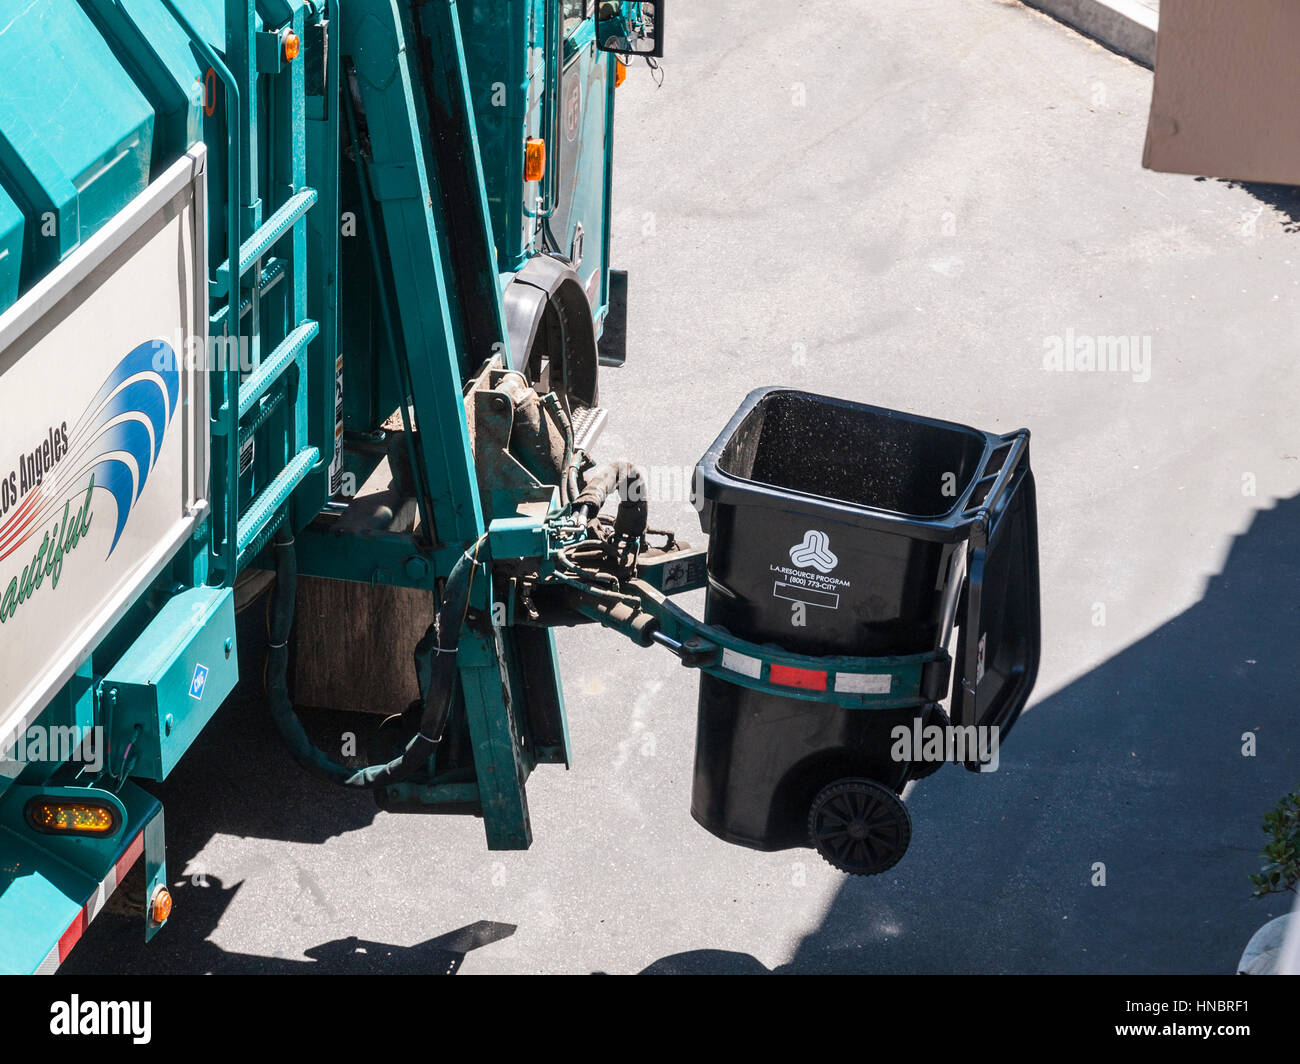 Los Angeles, California, USA - July 13, 2010:  City of Los Angeles Department of Sanitation automated trash truck arm at work. Stock Photo